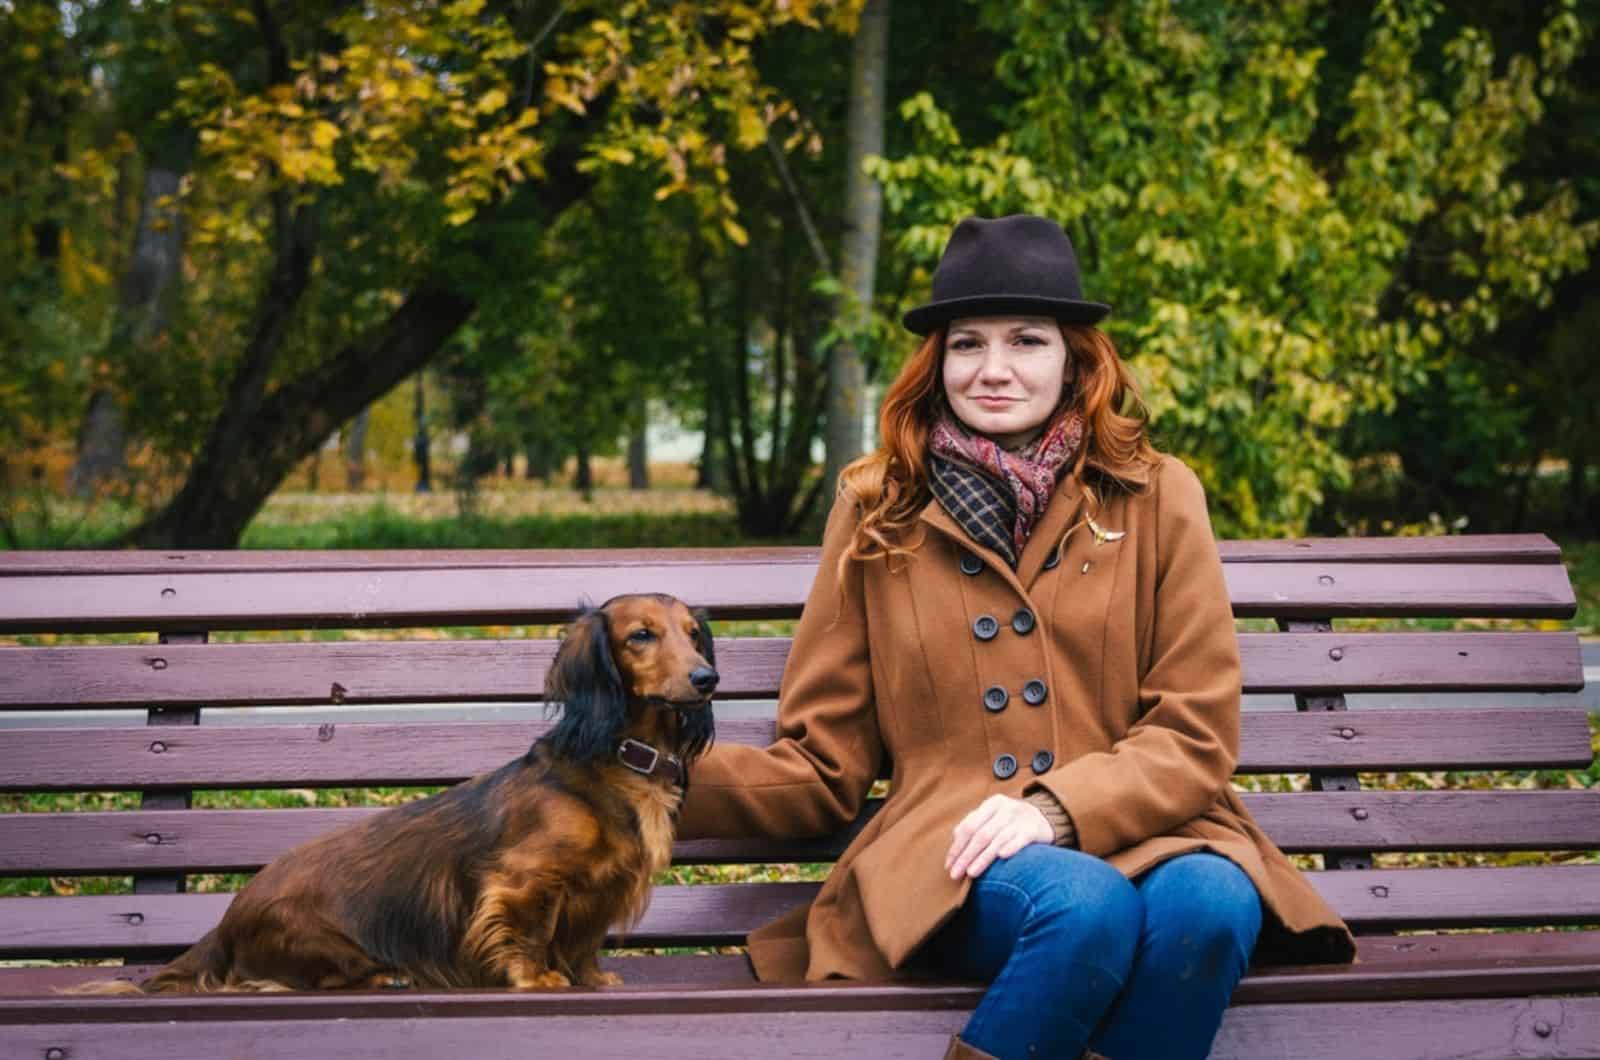 woman and dachshund dog sitting on the bench in the park